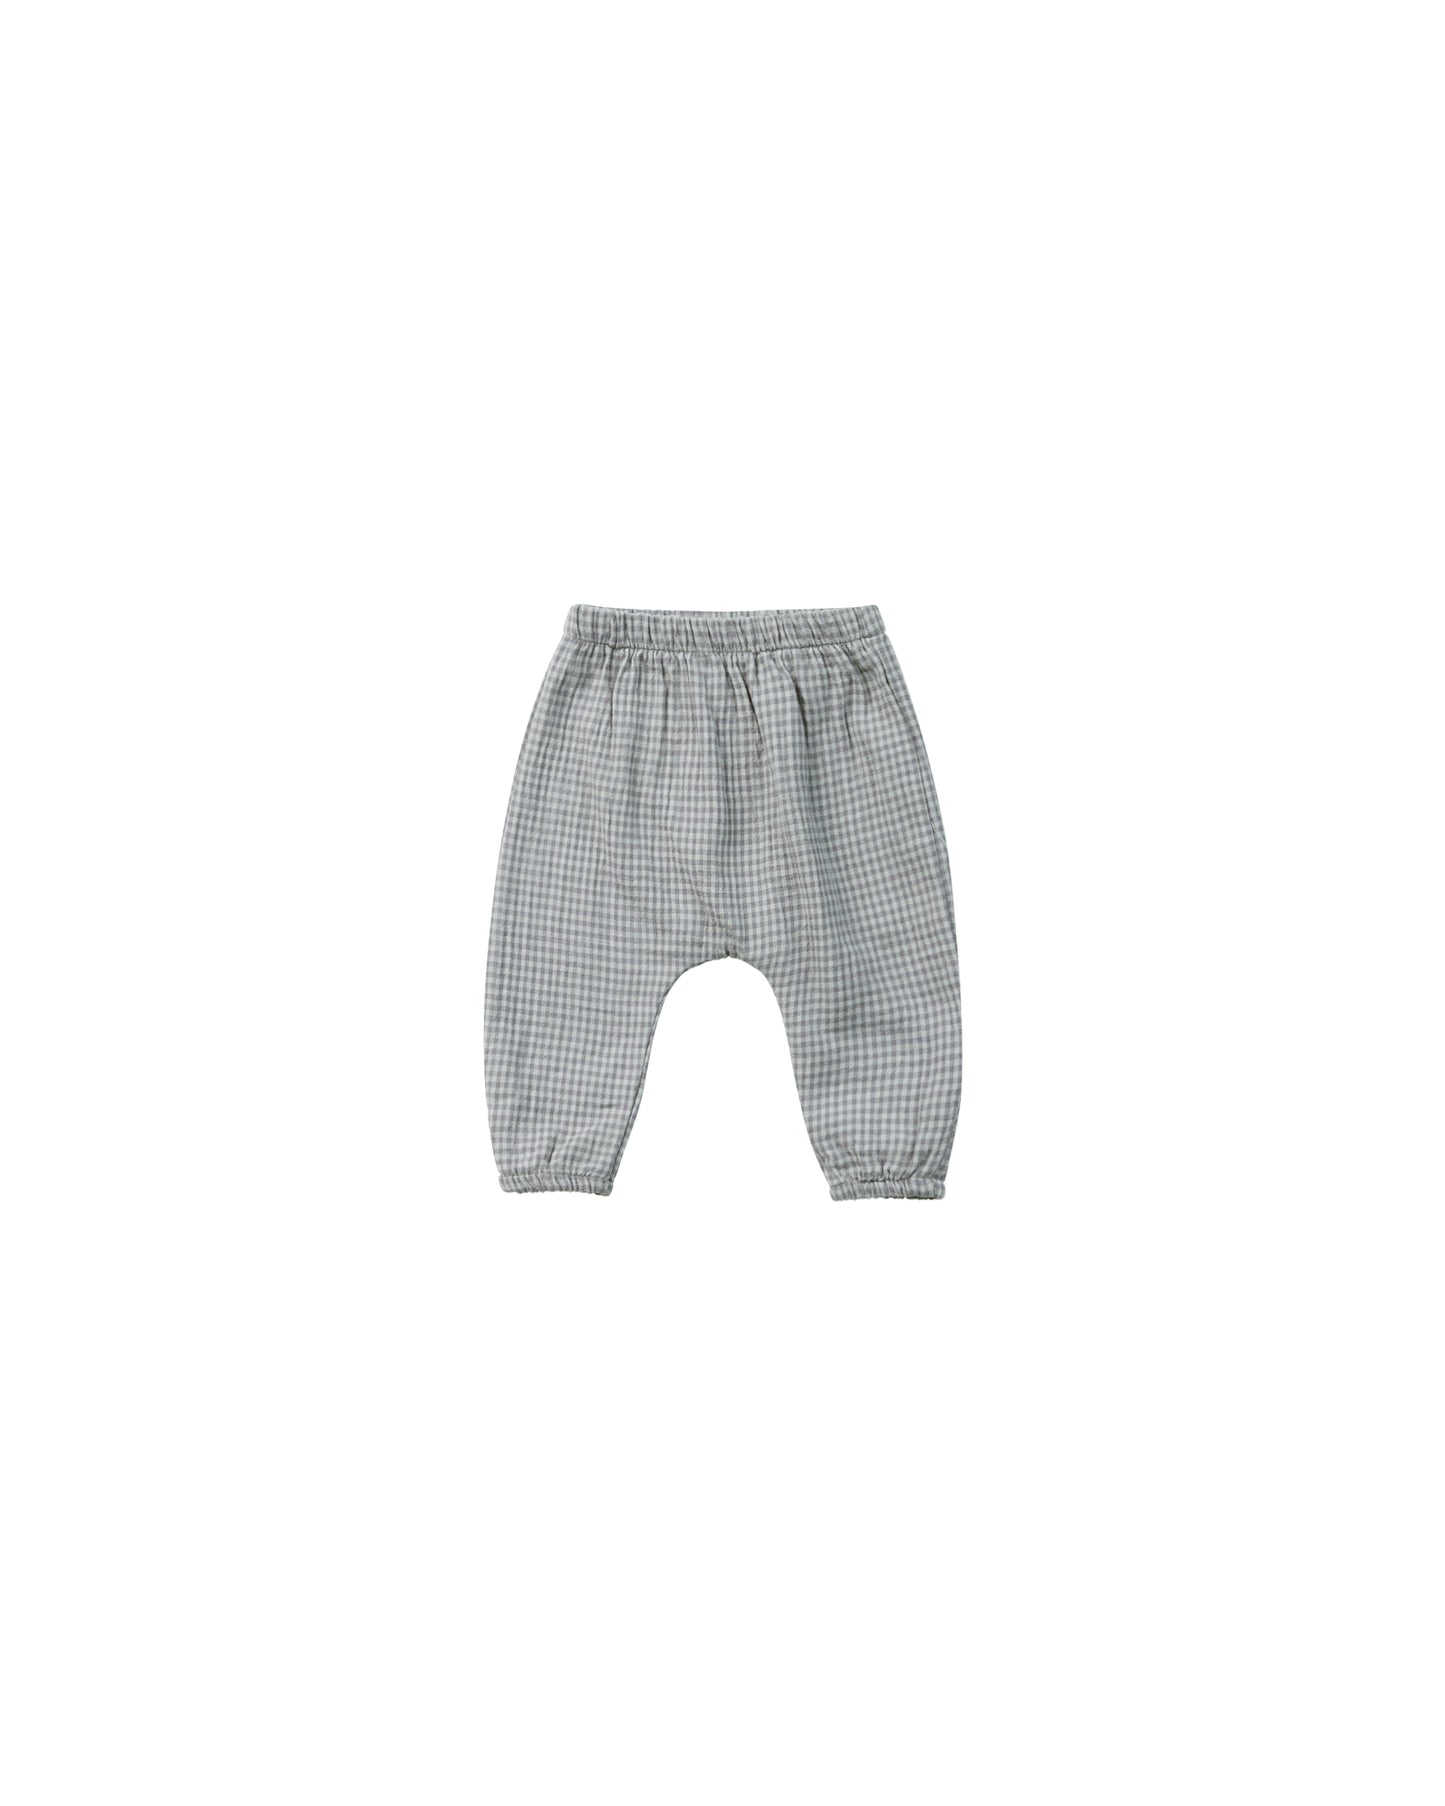 Woven Pant | Blue Gingham